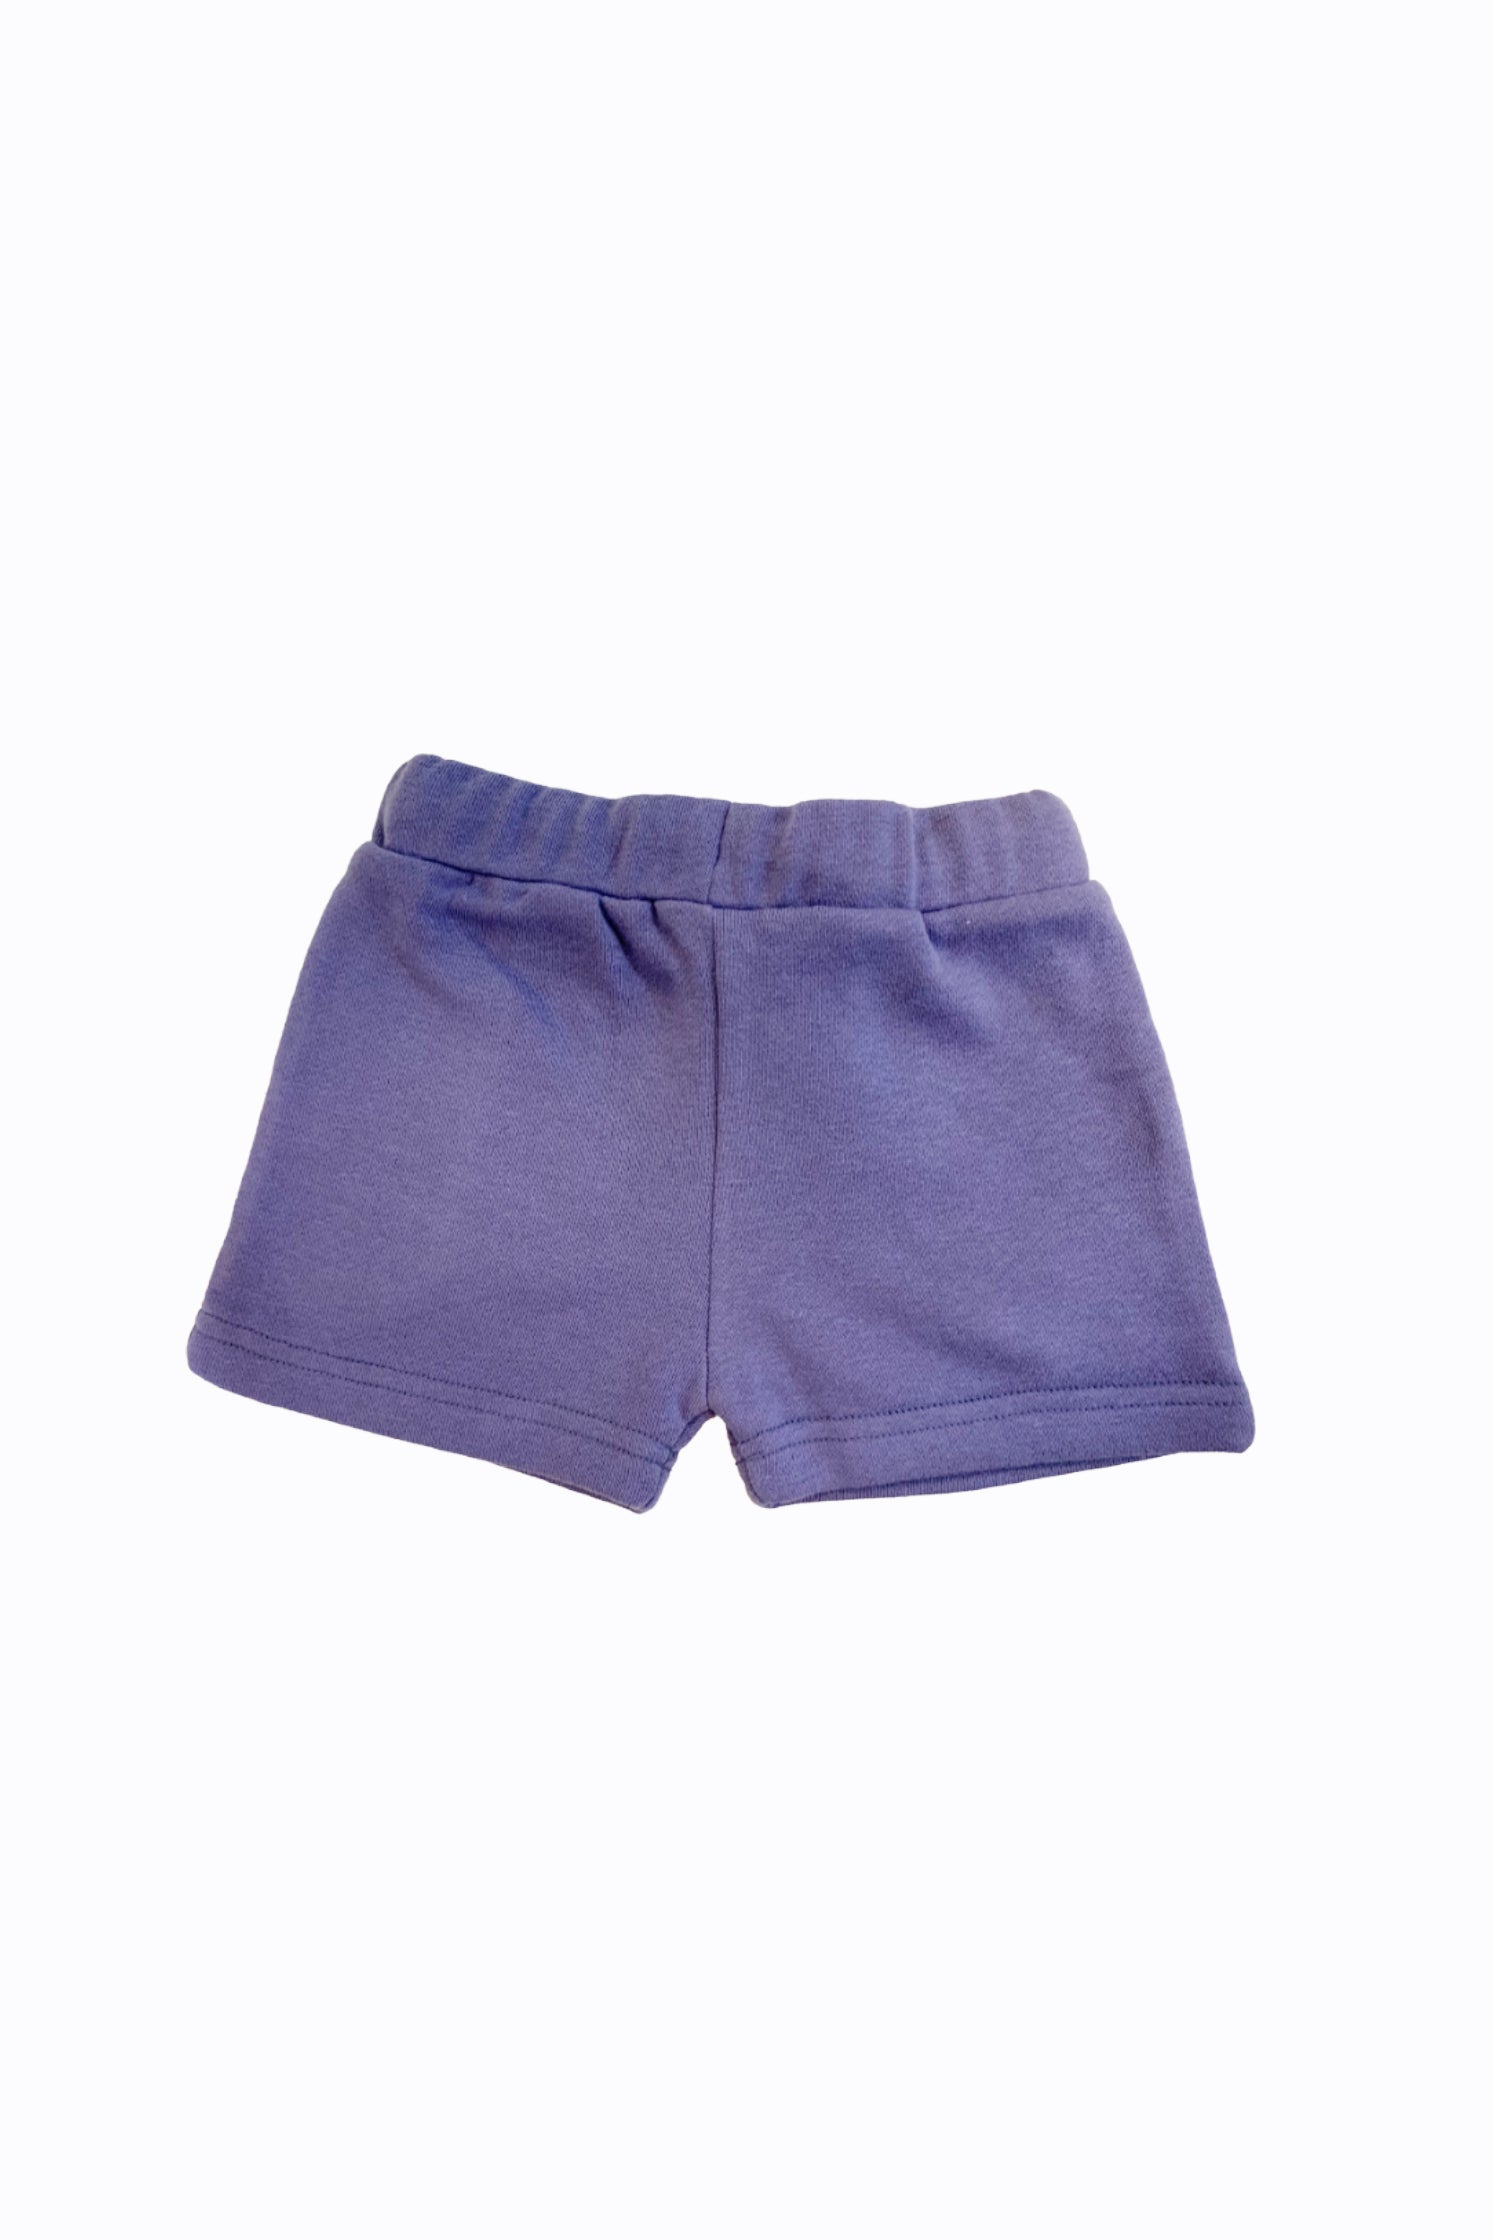 BABY SHORTS PURPLE FRONT EMBROIDERY